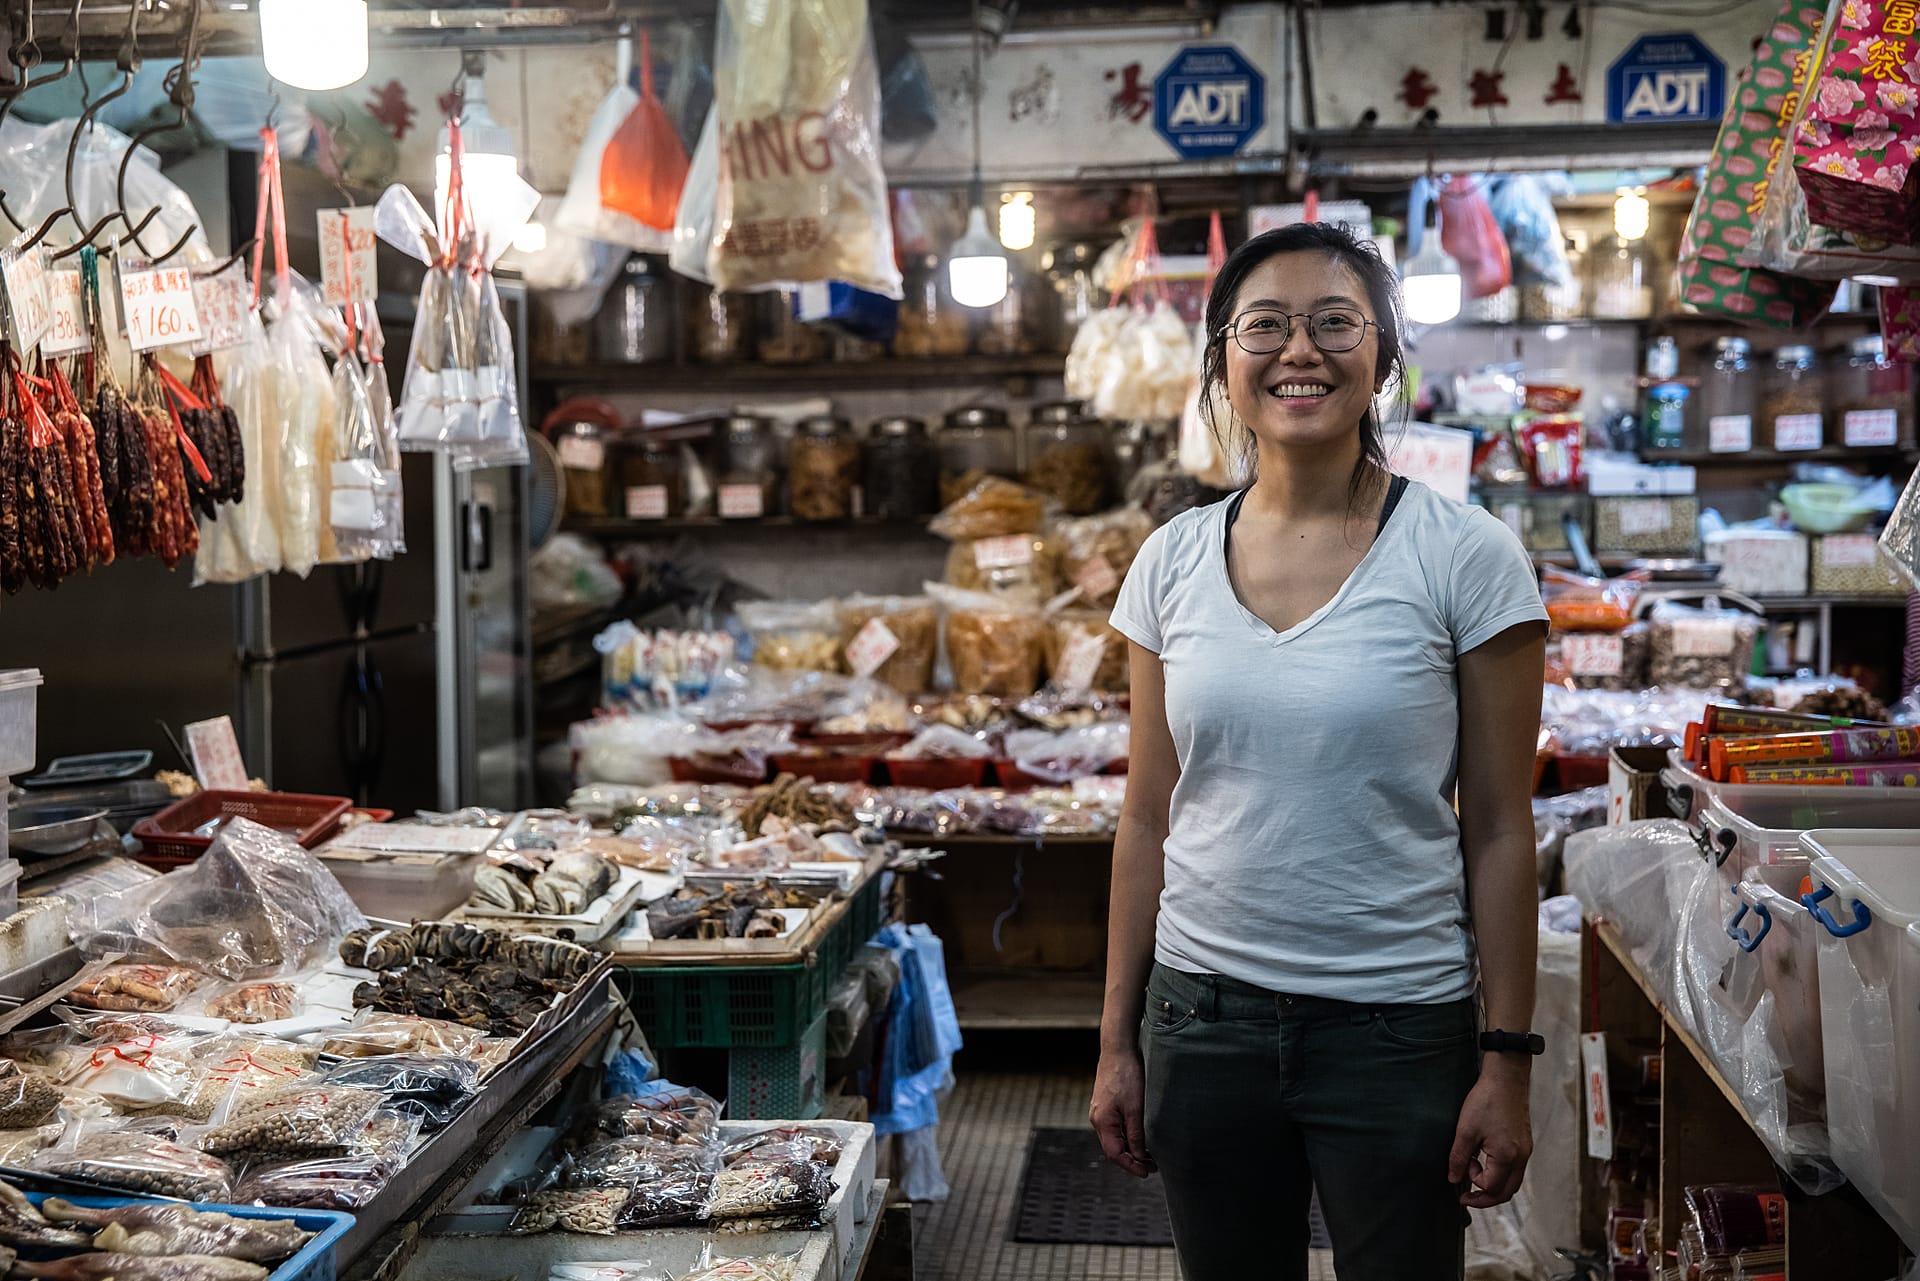 Jah Ying Chung, a food researcher in China, stands in a packaged food aisle of a store that is also a wet market. Jah Ying is the co-founder of The Good Growth Co., which researches Chinese consumers' attitudes toward food and works in the plant-based/alternative protein and animal welfare spaces. Hong Kong, China, 2022. #unboundproject / We Animals Media